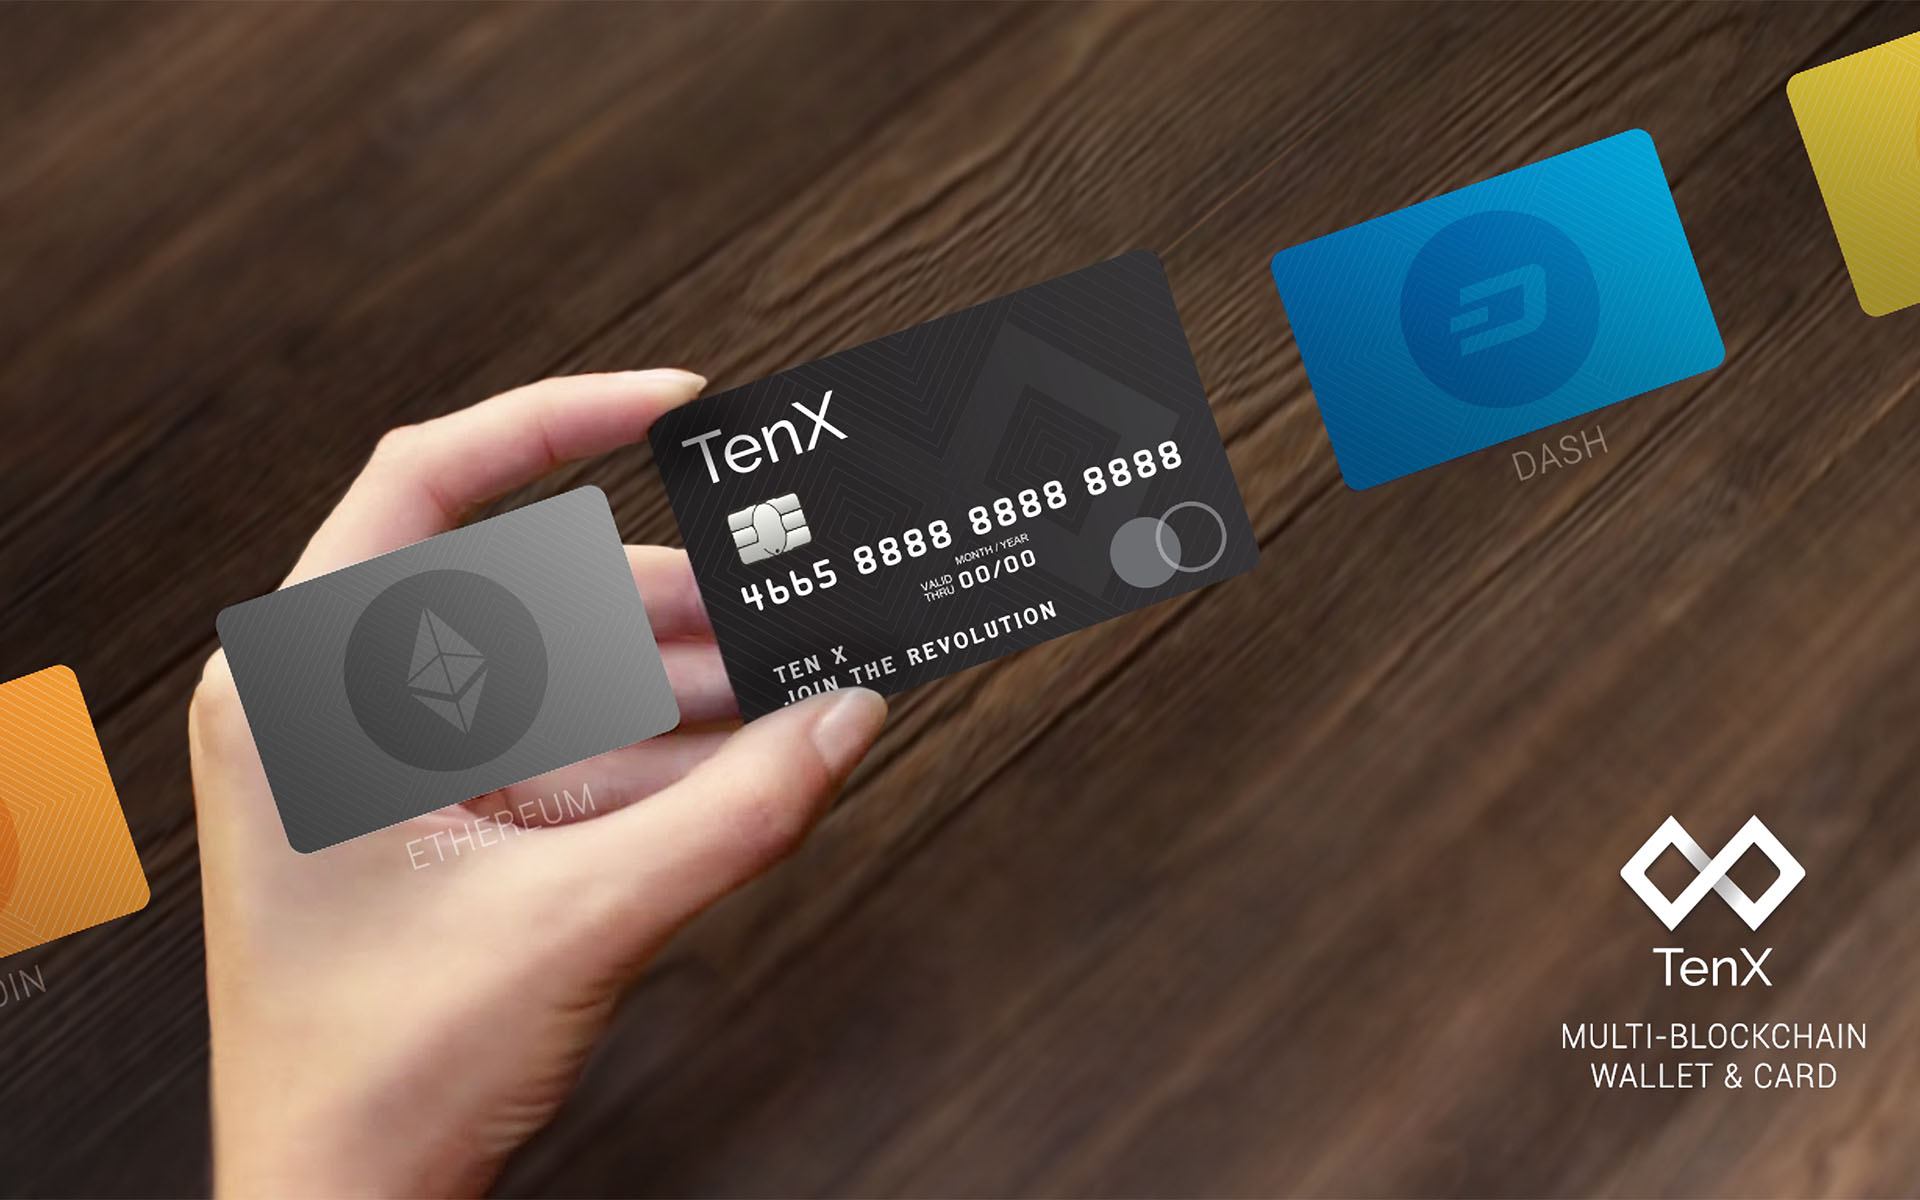 TenX Visa Card Offers Way to Use Cryptocurrencies in Everyday Life